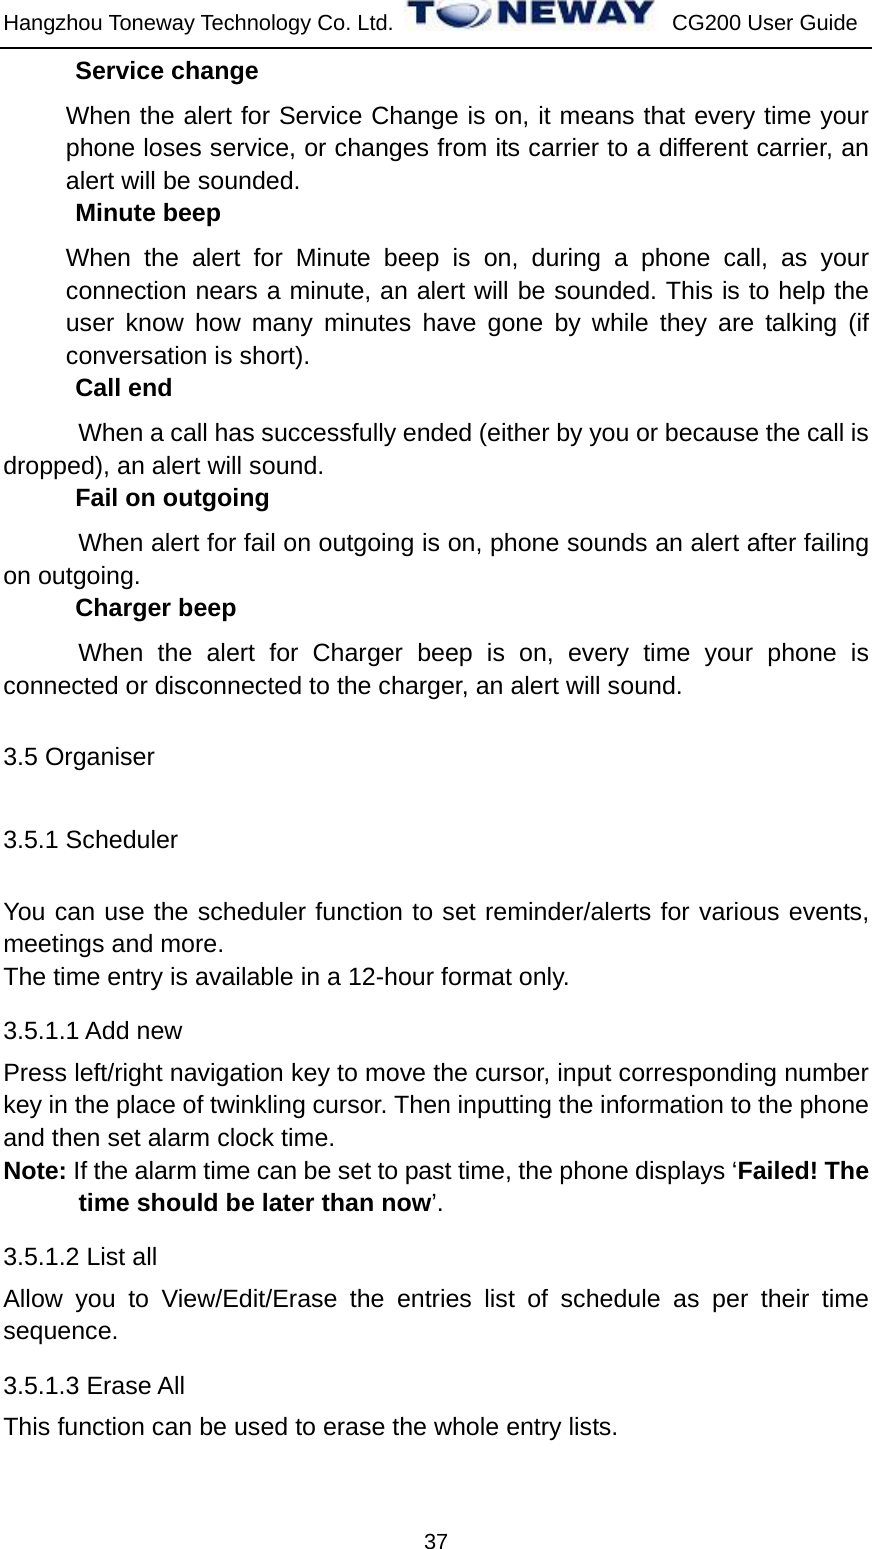 Hangzhou Toneway Technology Co. Ltd.    CG200 User Guide 37 Service change When the alert for Service Change is on, it means that every time your phone loses service, or changes from its carrier to a different carrier, an alert will be sounded. Minute beep When the alert for Minute beep is on, during a phone call, as your connection nears a minute, an alert will be sounded. This is to help the user know how many minutes have gone by while they are talking (if conversation is short). Call end When a call has successfully ended (either by you or because the call is dropped), an alert will sound. Fail on outgoing When alert for fail on outgoing is on, phone sounds an alert after failing on outgoing. Charger beep When the alert for Charger beep is on, every time your phone is connected or disconnected to the charger, an alert will sound. 3.5 Organiser 3.5.1 Scheduler You can use the scheduler function to set reminder/alerts for various events, meetings and more. The time entry is available in a 12-hour format only. 3.5.1.1 Add new Press left/right navigation key to move the cursor, input corresponding number key in the place of twinkling cursor. Then inputting the information to the phone and then set alarm clock time.   Note: If the alarm time can be set to past time, the phone displays ‘Failed! The time should be later than now’. 3.5.1.2 List all Allow you to View/Edit/Erase the entries list of schedule as per their time sequence. 3.5.1.3 Erase All This function can be used to erase the whole entry lists. 